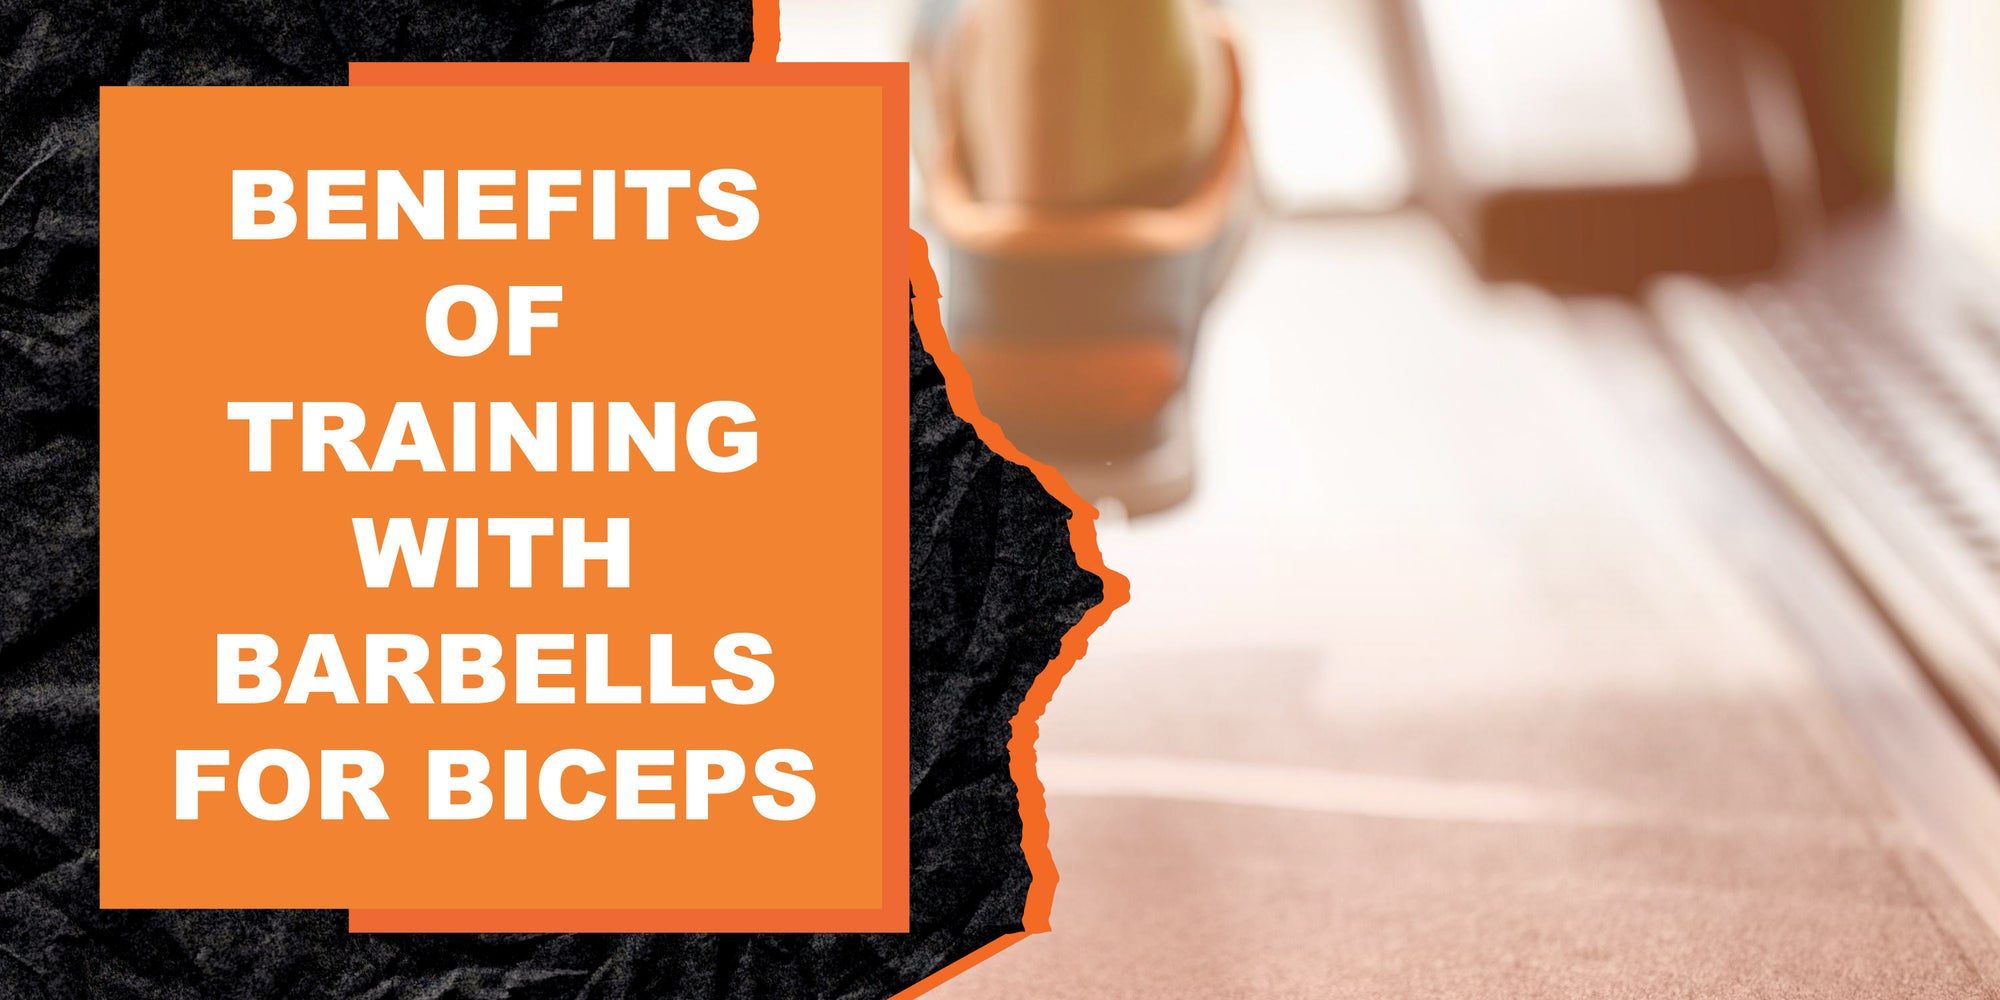 The Benefits of Training with Barbells for Bicep Development